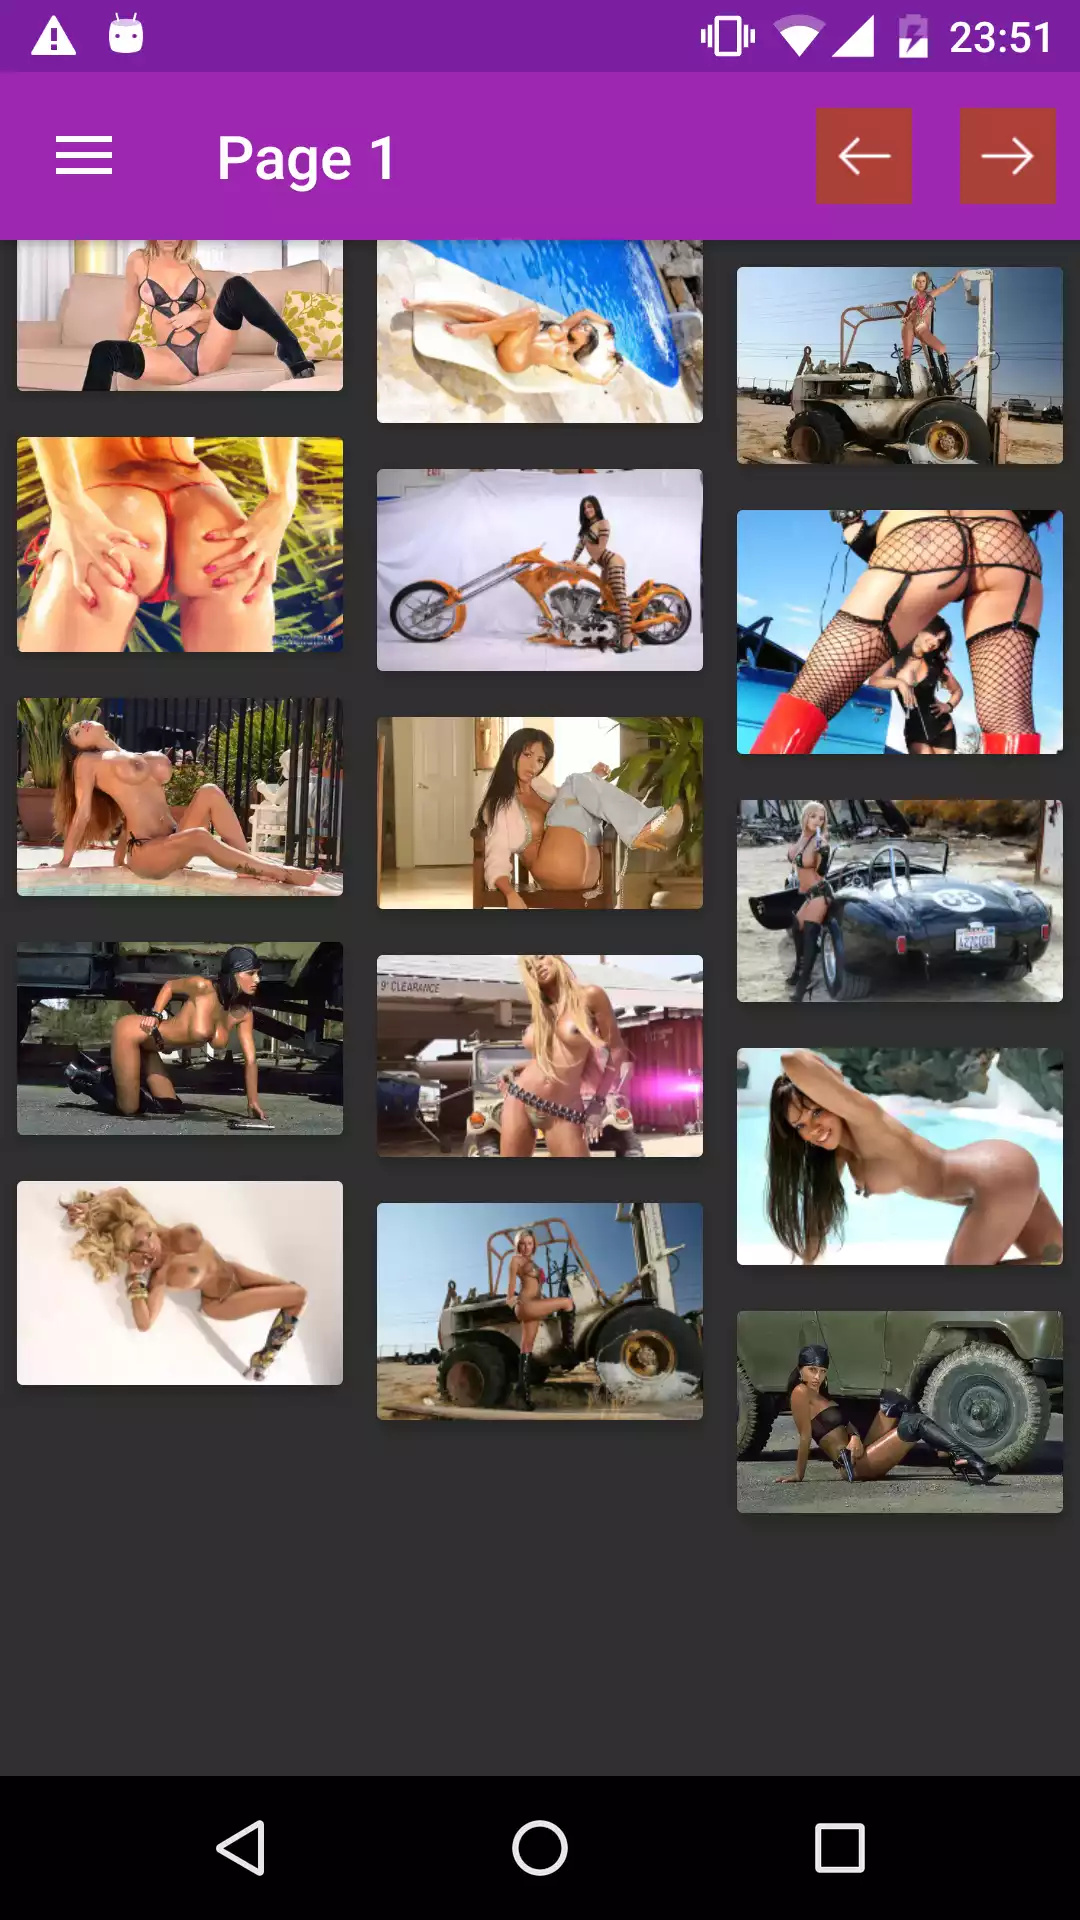 Action Wallpapers pics,apk,erotic,blowbang,wallpaper,galleries,updates,oictures,top,photo,gallery,android,sexy,best,app,hentai,backgrounds,the,wallpapers